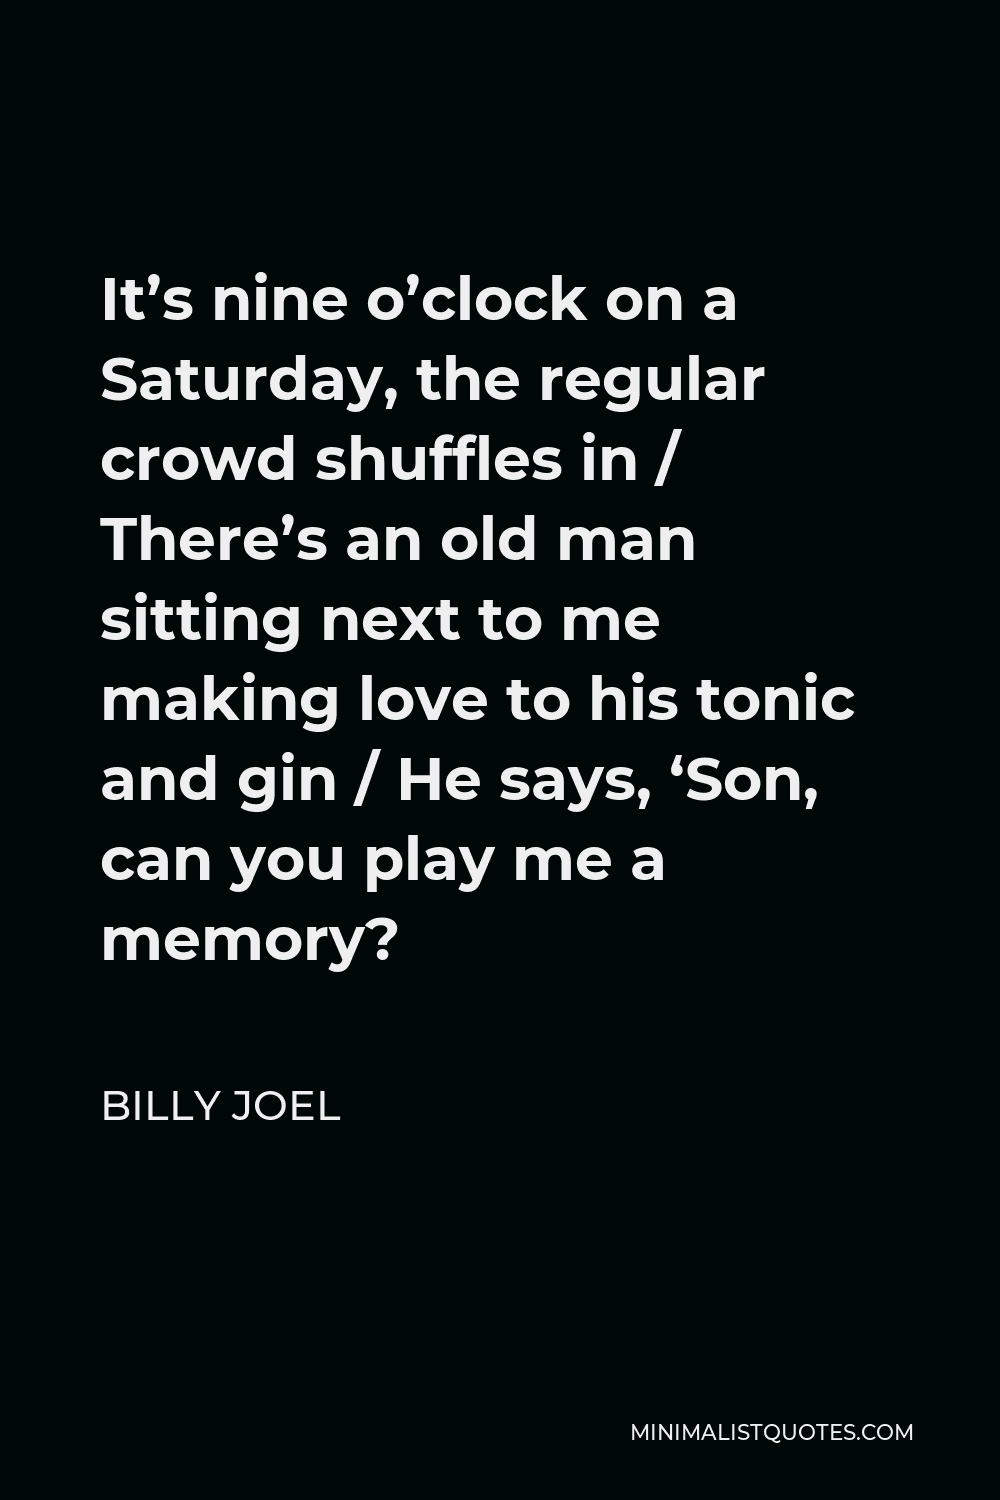 Billy Joel Quote - It’s nine o’clock on a Saturday, the regular crowd shuffles in / There’s an old man sitting next to me making love to his tonic and gin / He says, ‘Son, can you play me a memory?